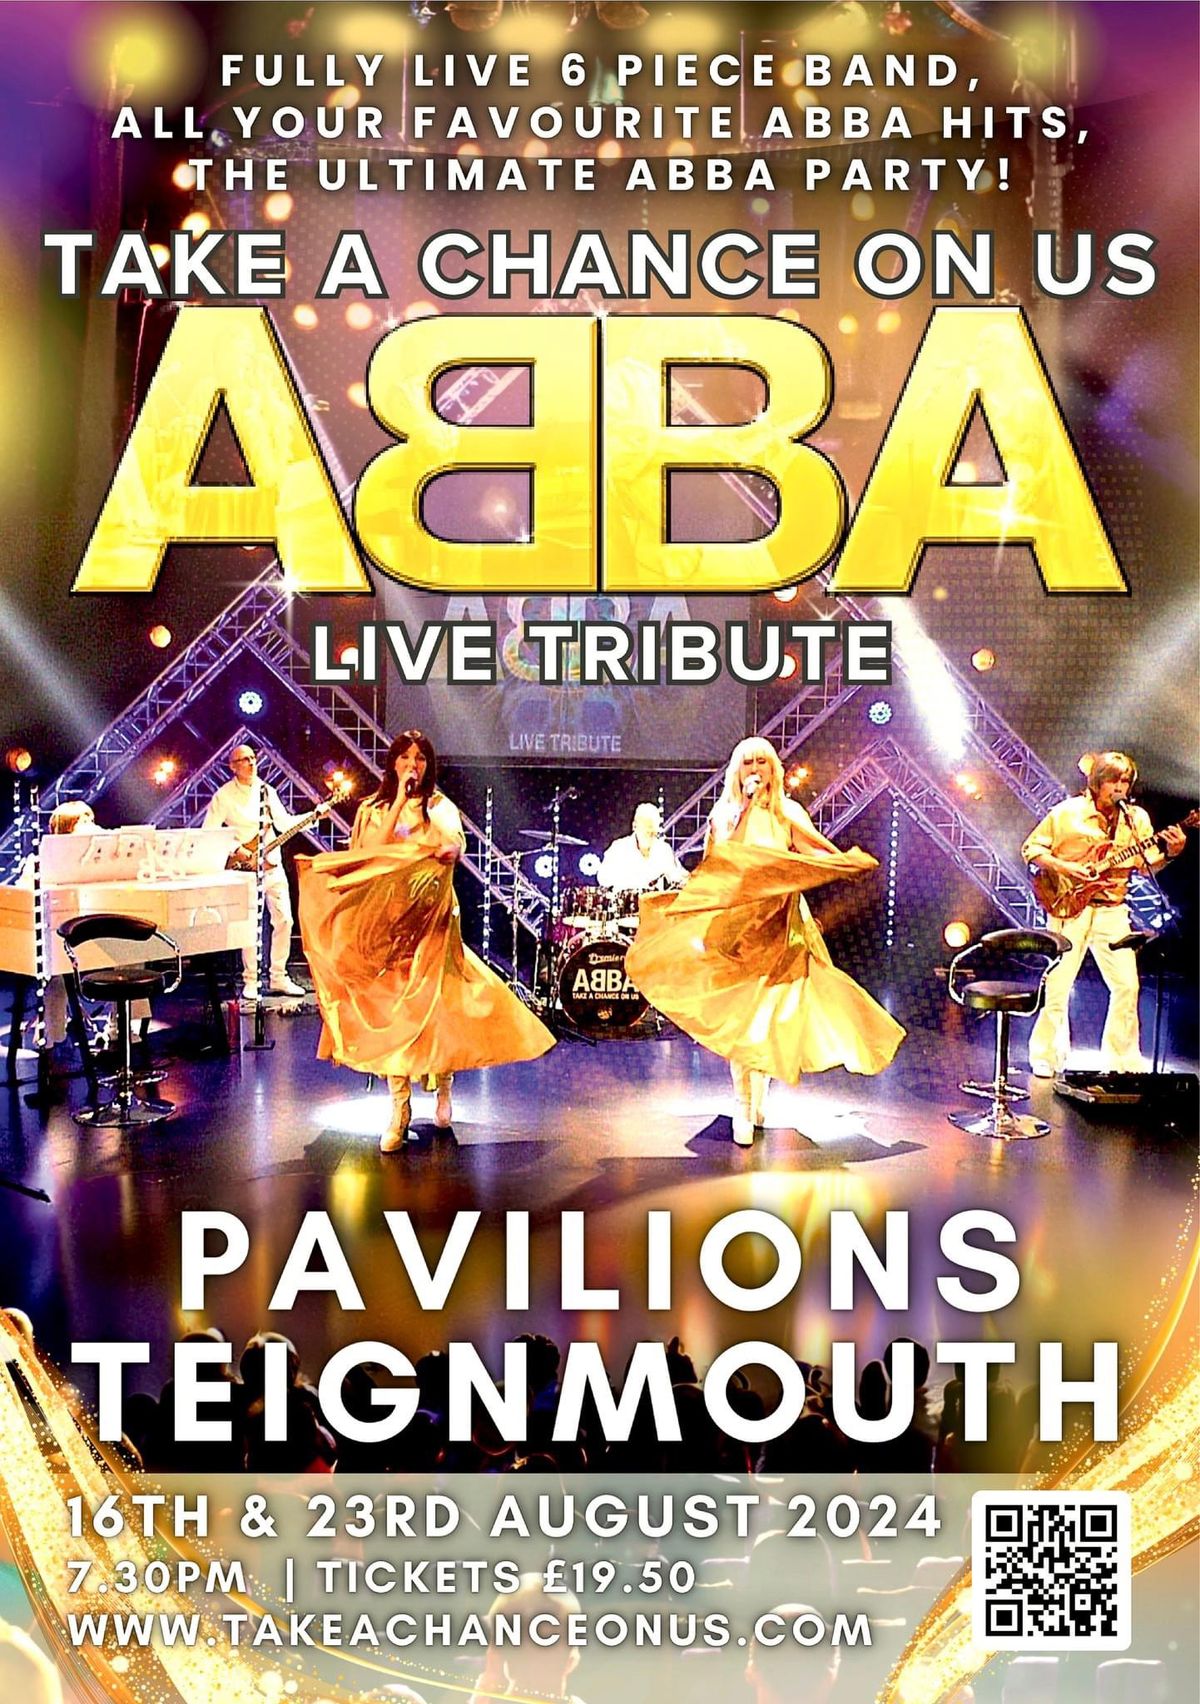 TAKE A CHANCE ON US TEIGNMOUTH PAVILION THEATRE ABBA TAKE A CHANCE ON US 16th AND 23rd AUGUST 2024 